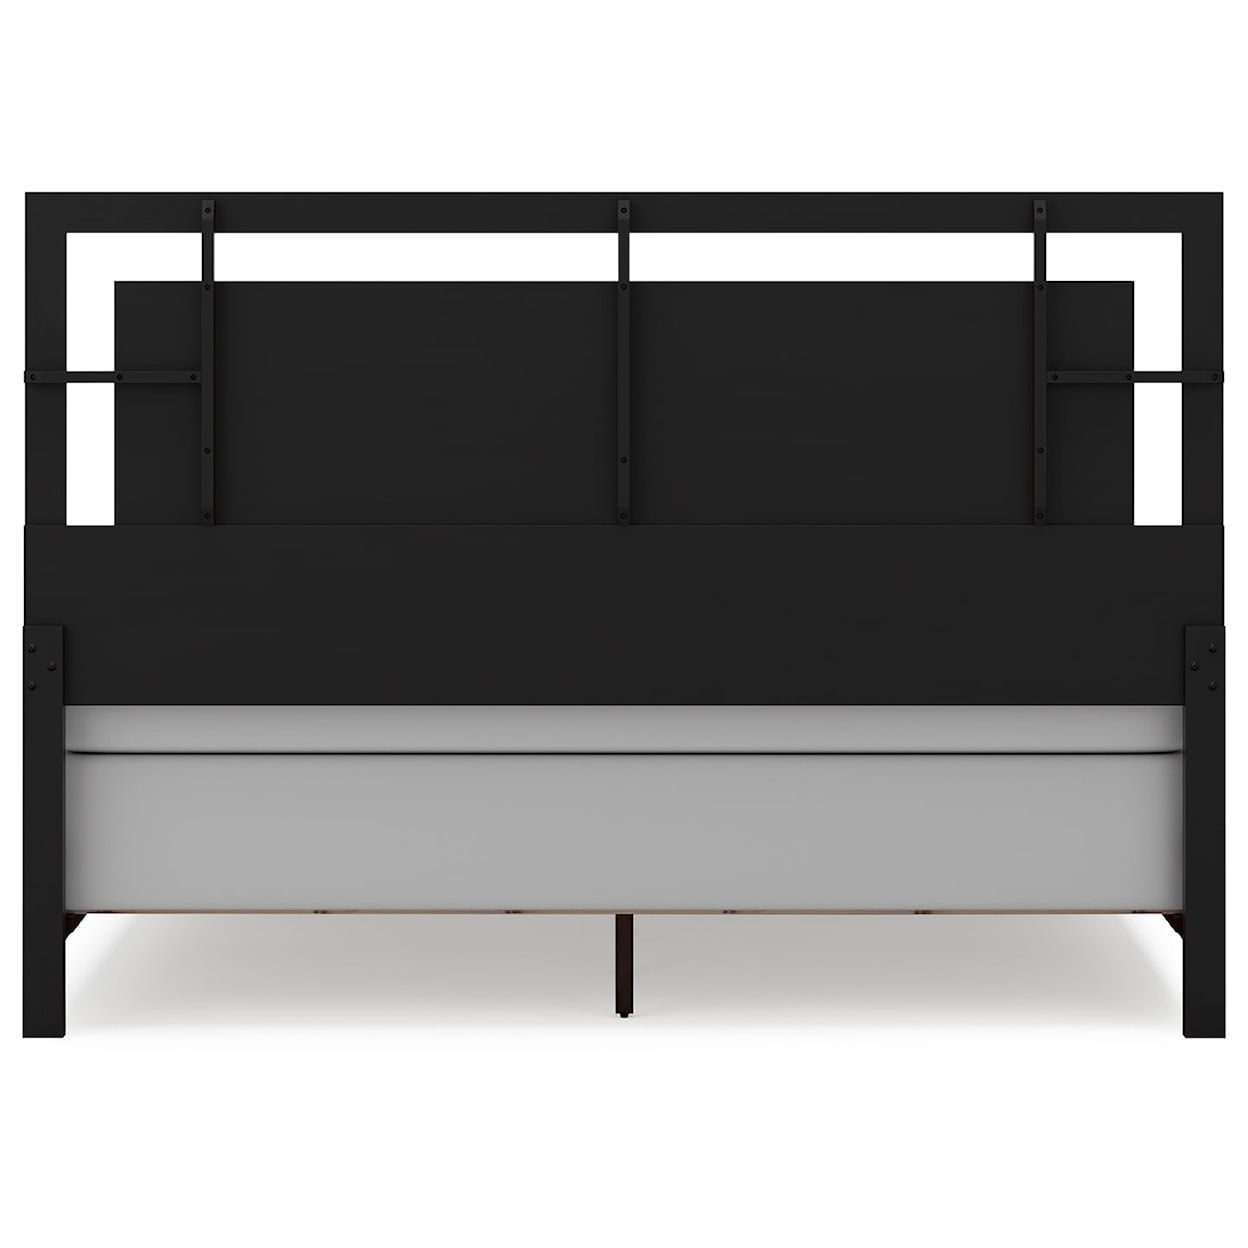 Benchcraft Covetown King Panel Bed